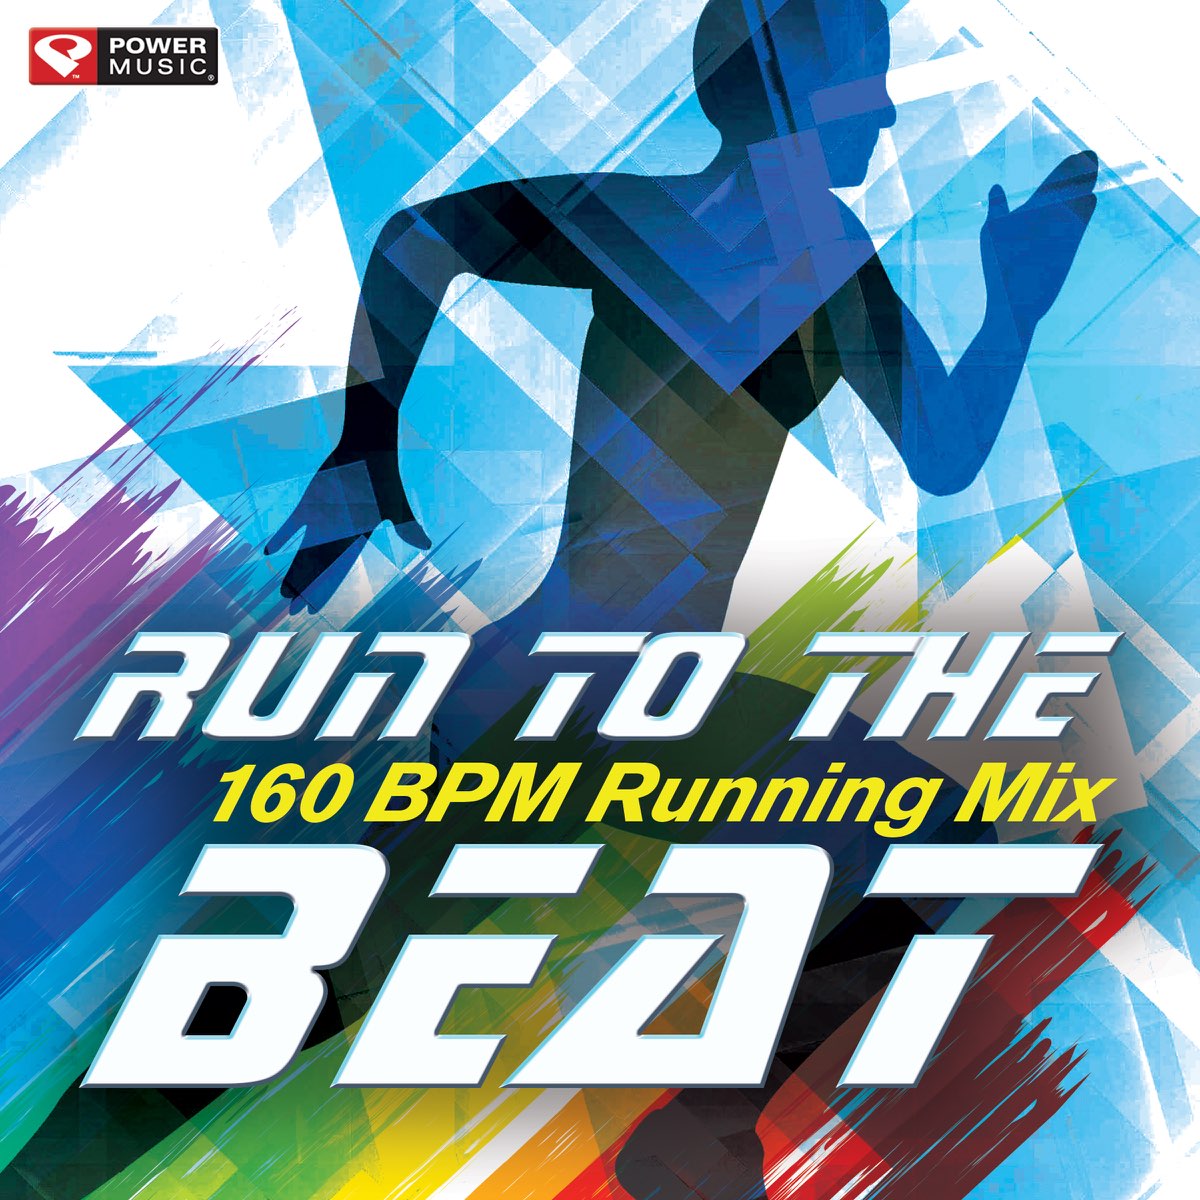 Run to the Beat (60 Min Non-Stop Running Mix 160 BPM) - Album by Power Music  Workout - Apple Music